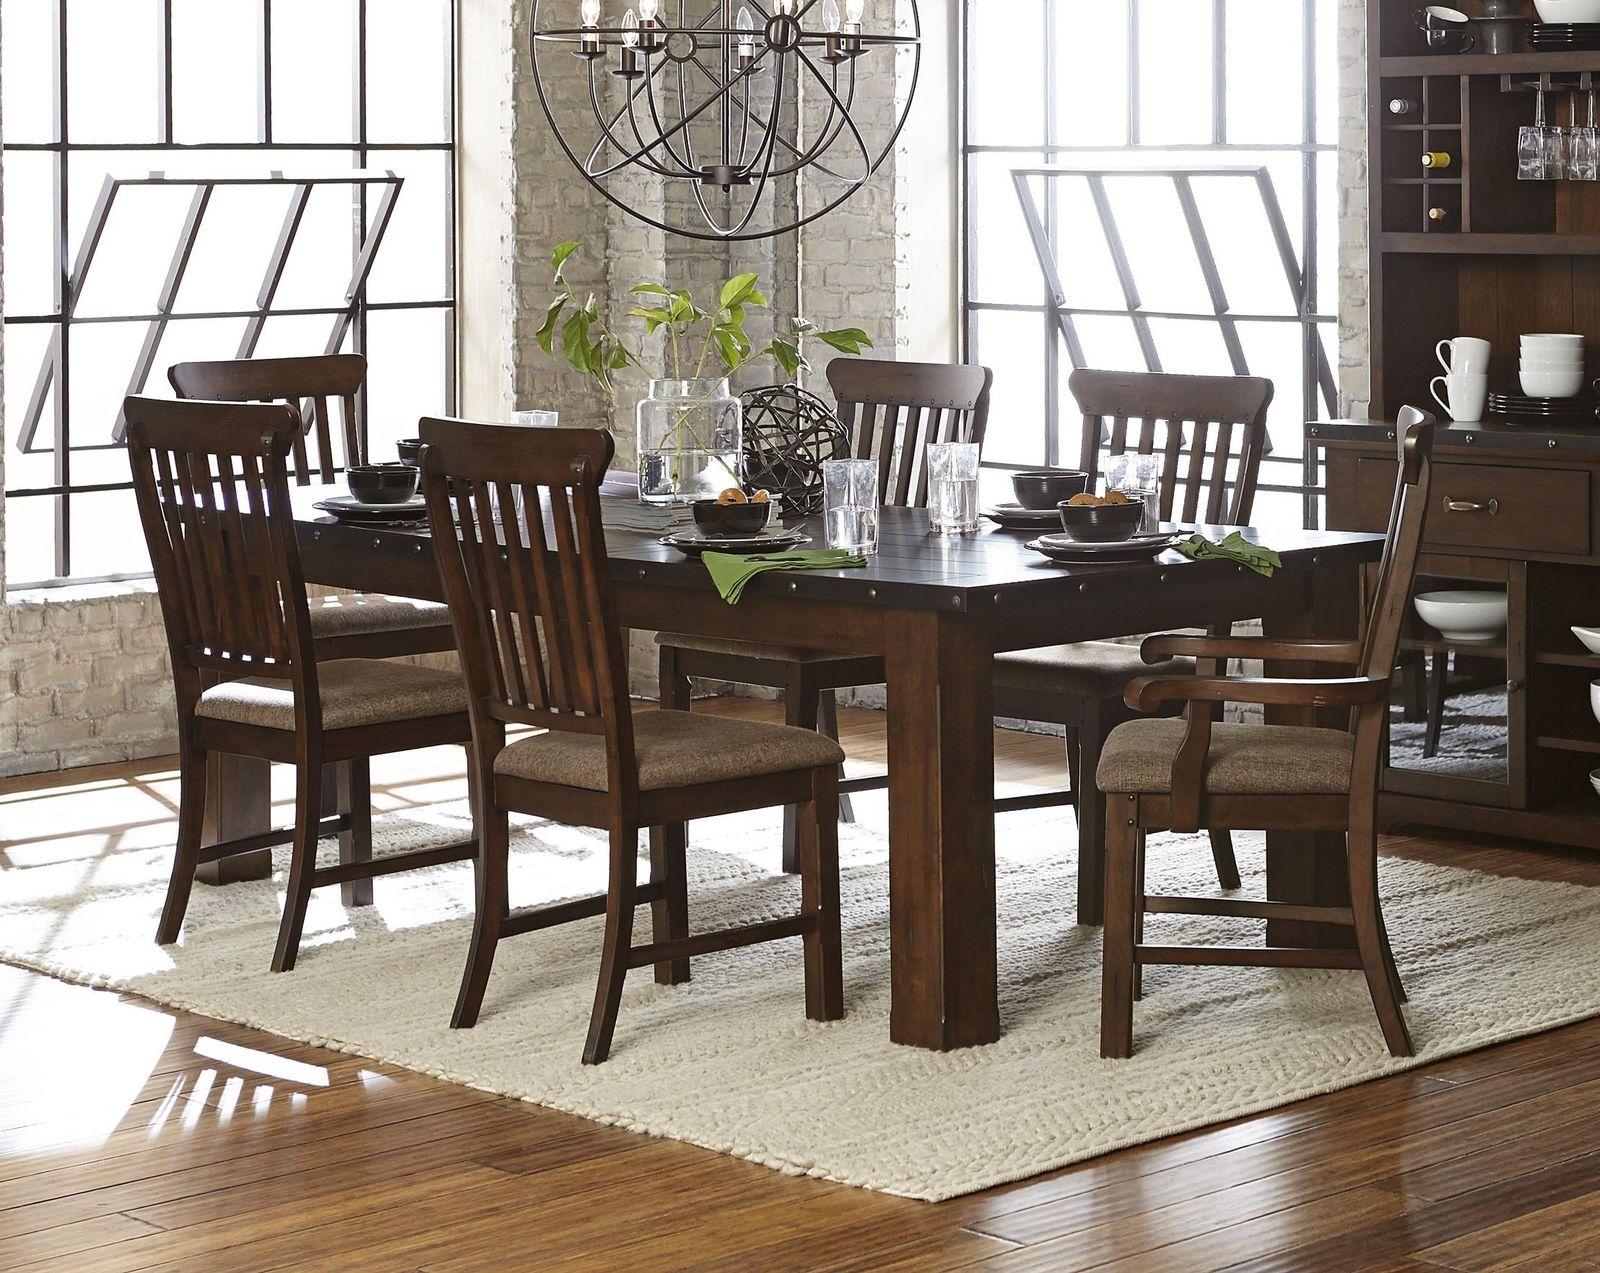 Classic, Traditional Dining Table Set Schleiger 5400-94+5400Ax2+5400Sx4-Schleiger in Brown Fabric